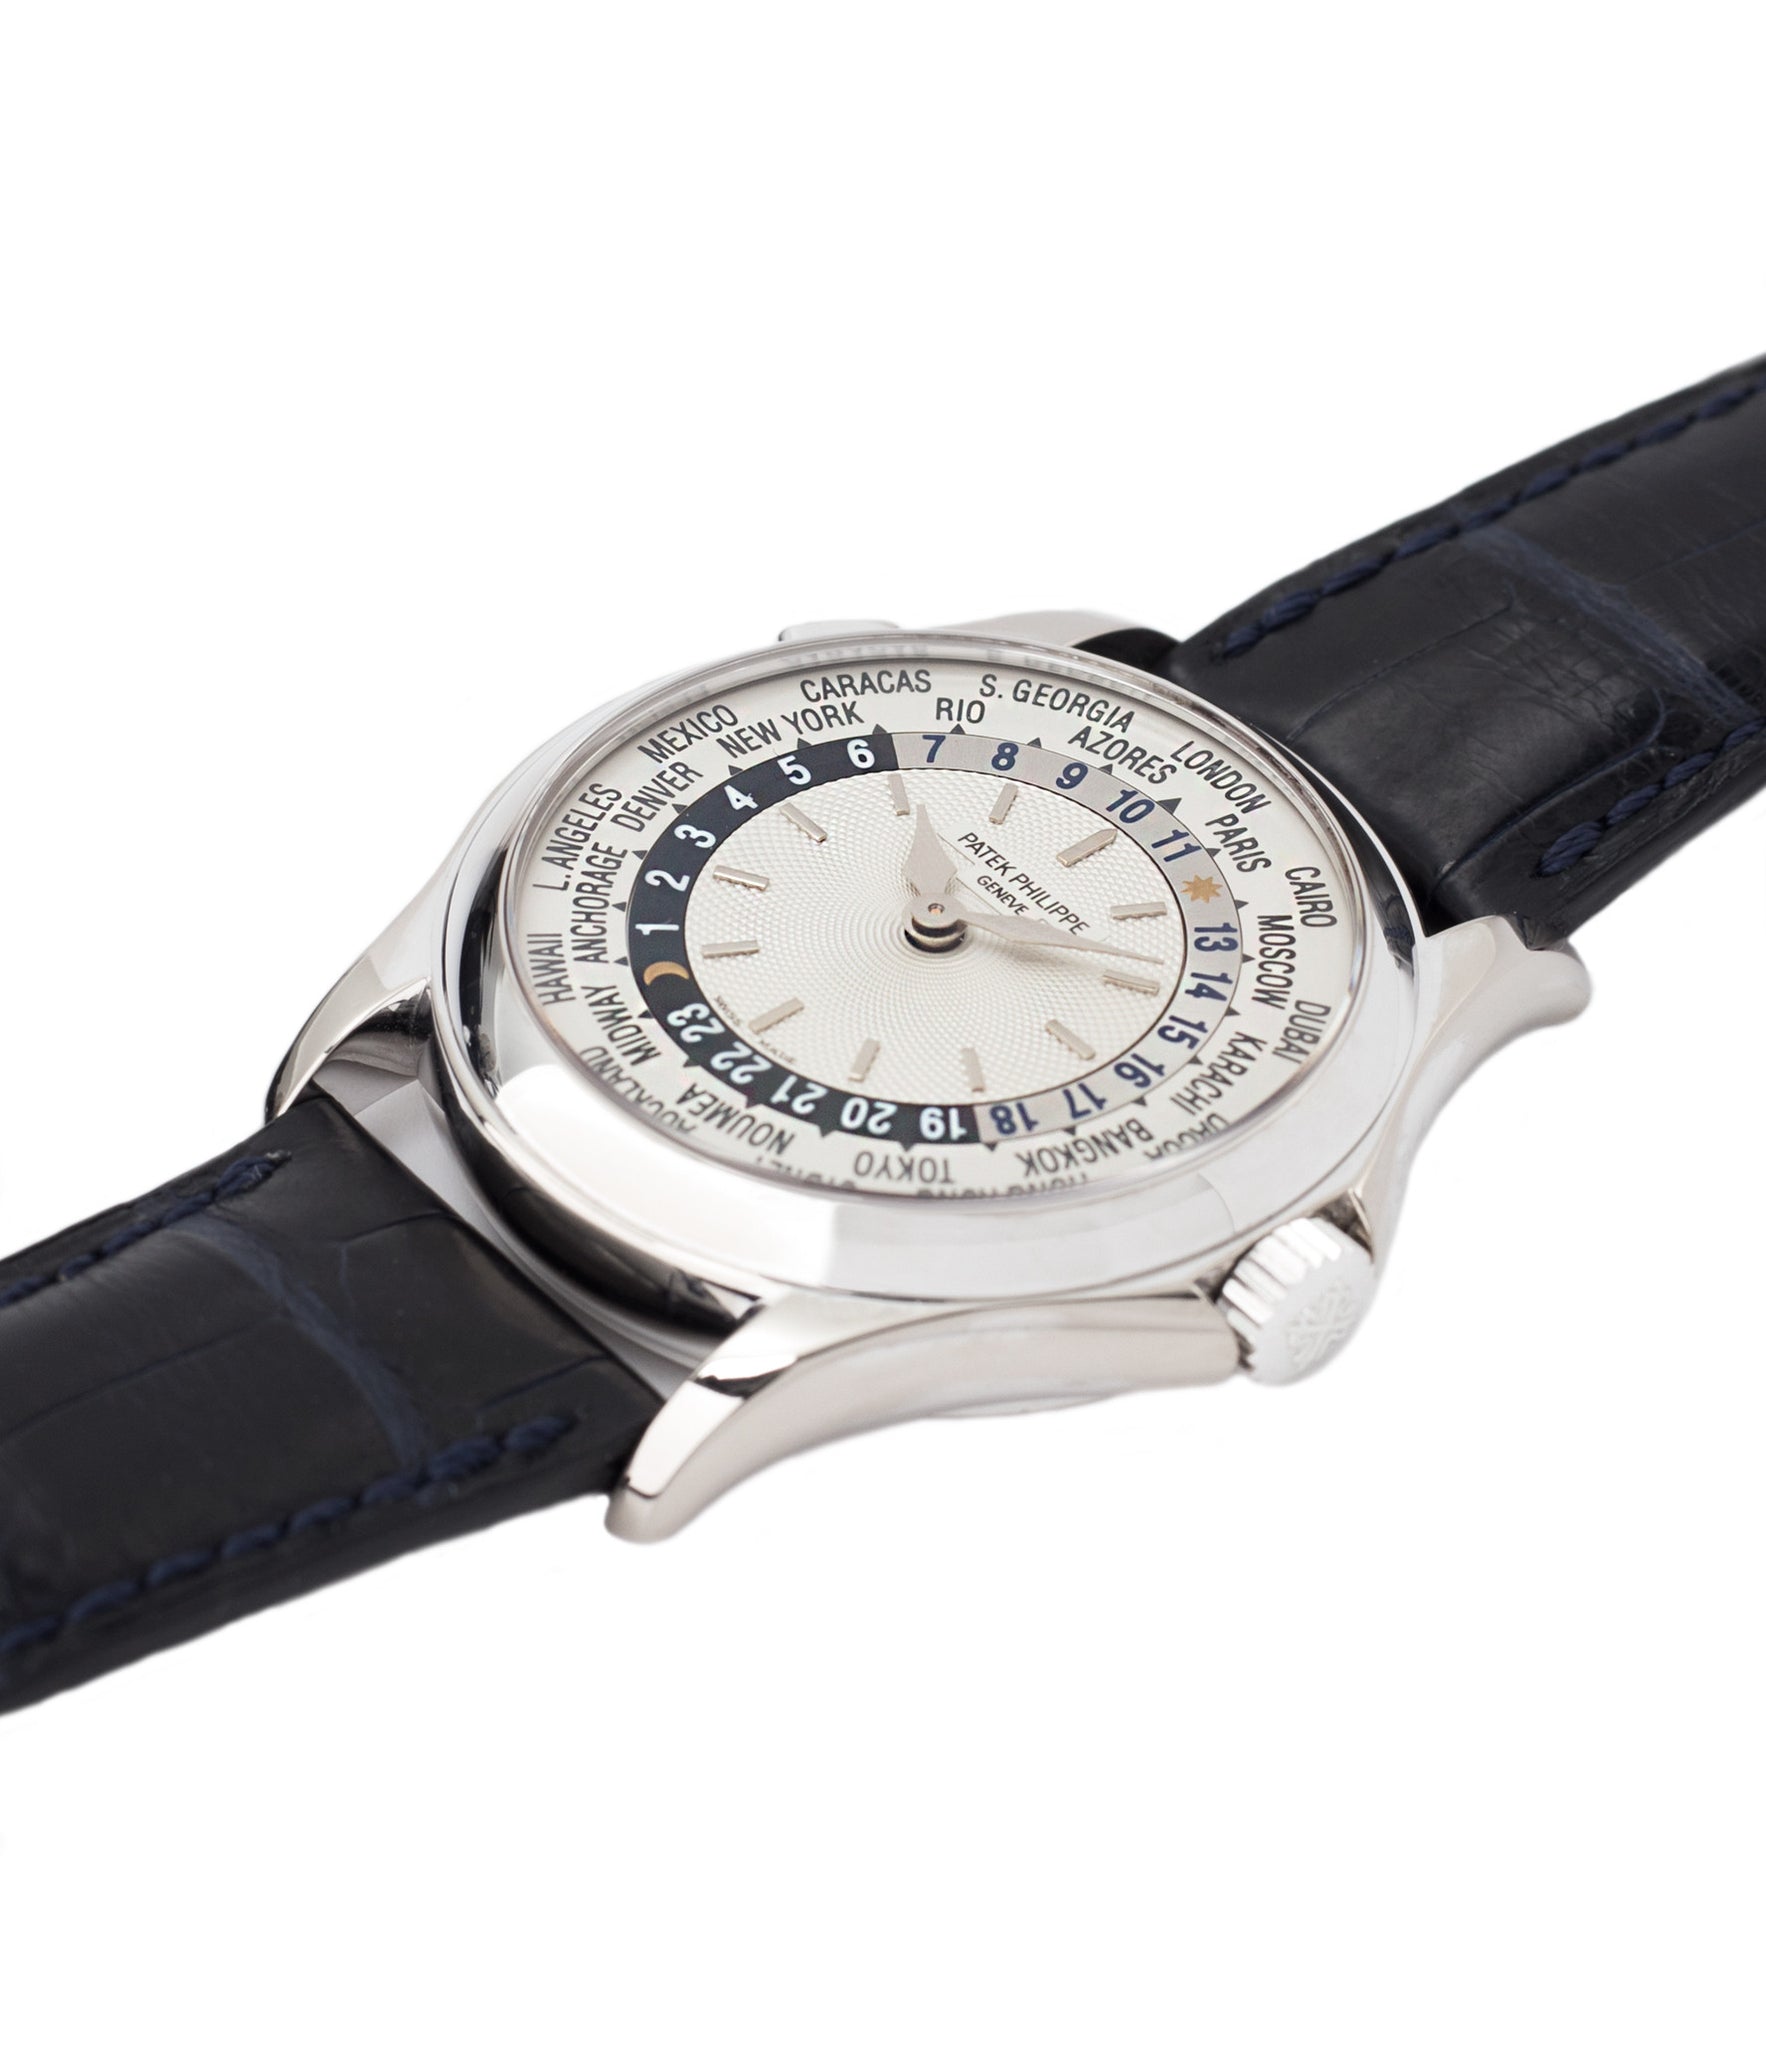 for sale Patek Philippe 5110G-001 white gold World-timer luxury dress watch online for sale at A Collected Man London specialist preowned luxury watches